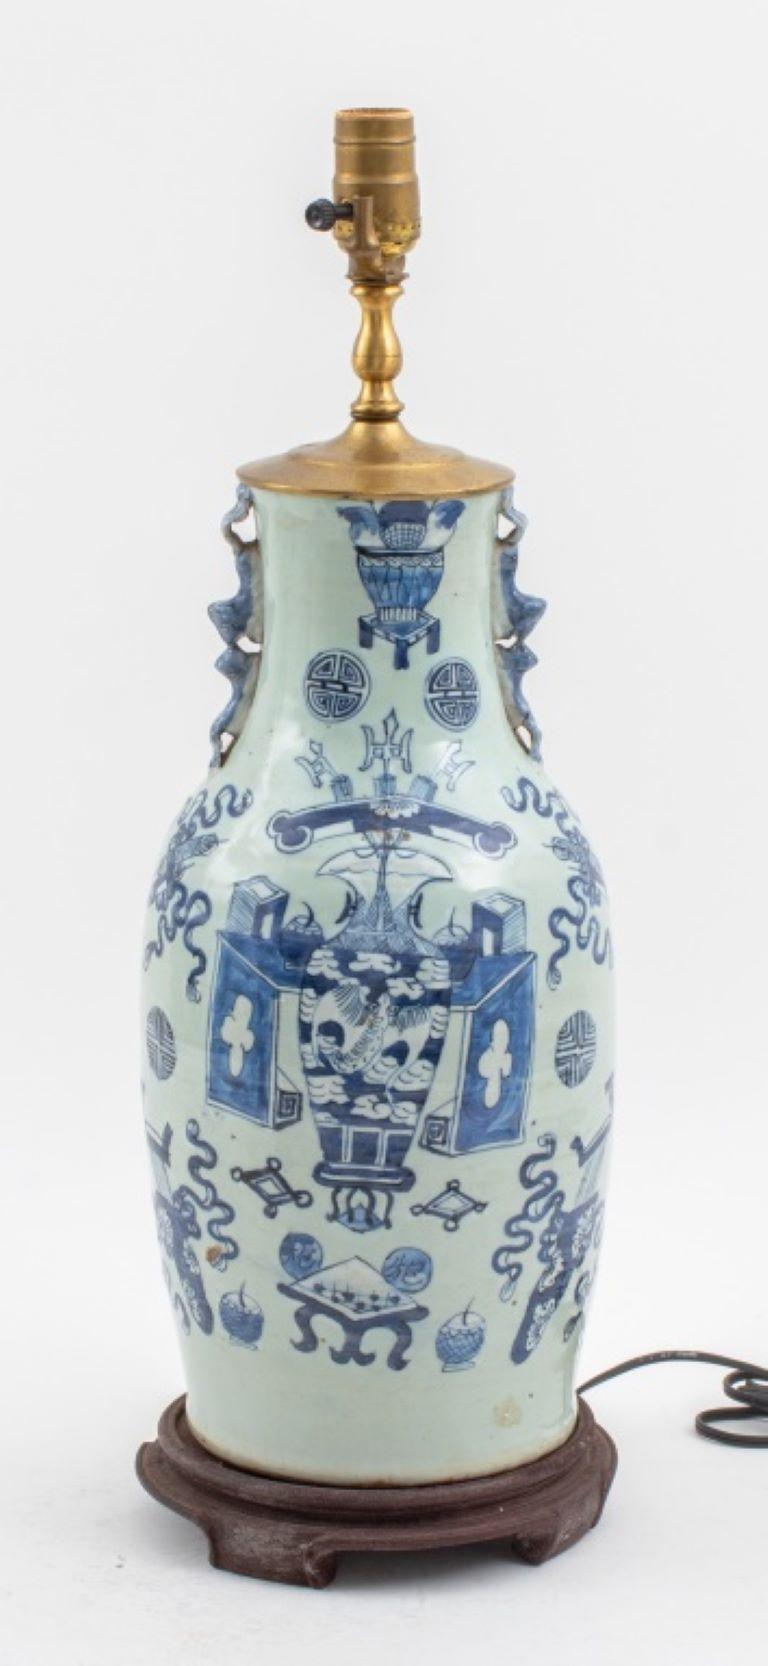 Chinese ceramic porcelain baluster vase with hand painted blue decoration on a celadon ground, two handles in the form of squirrels kissing, mounted on a wood base and fitted into a lamp. 